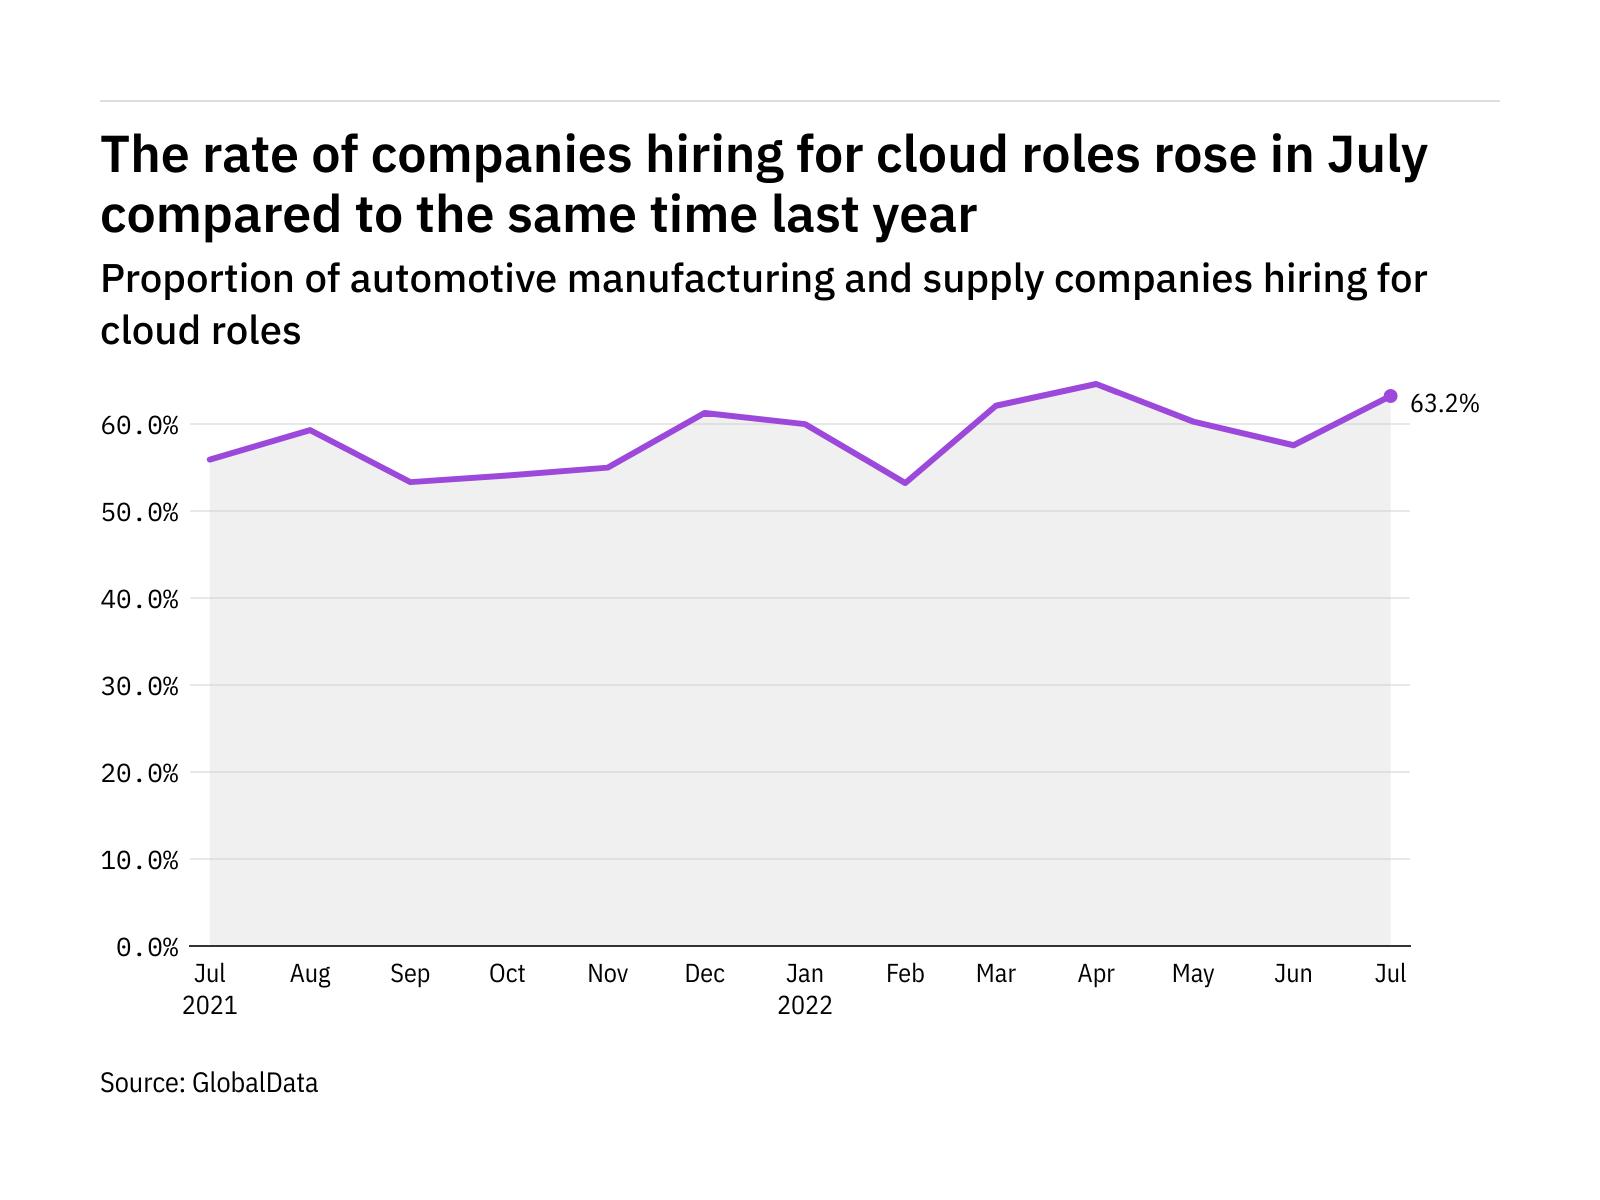 Cloud hiring levels in the automotive industry rose in July 2022